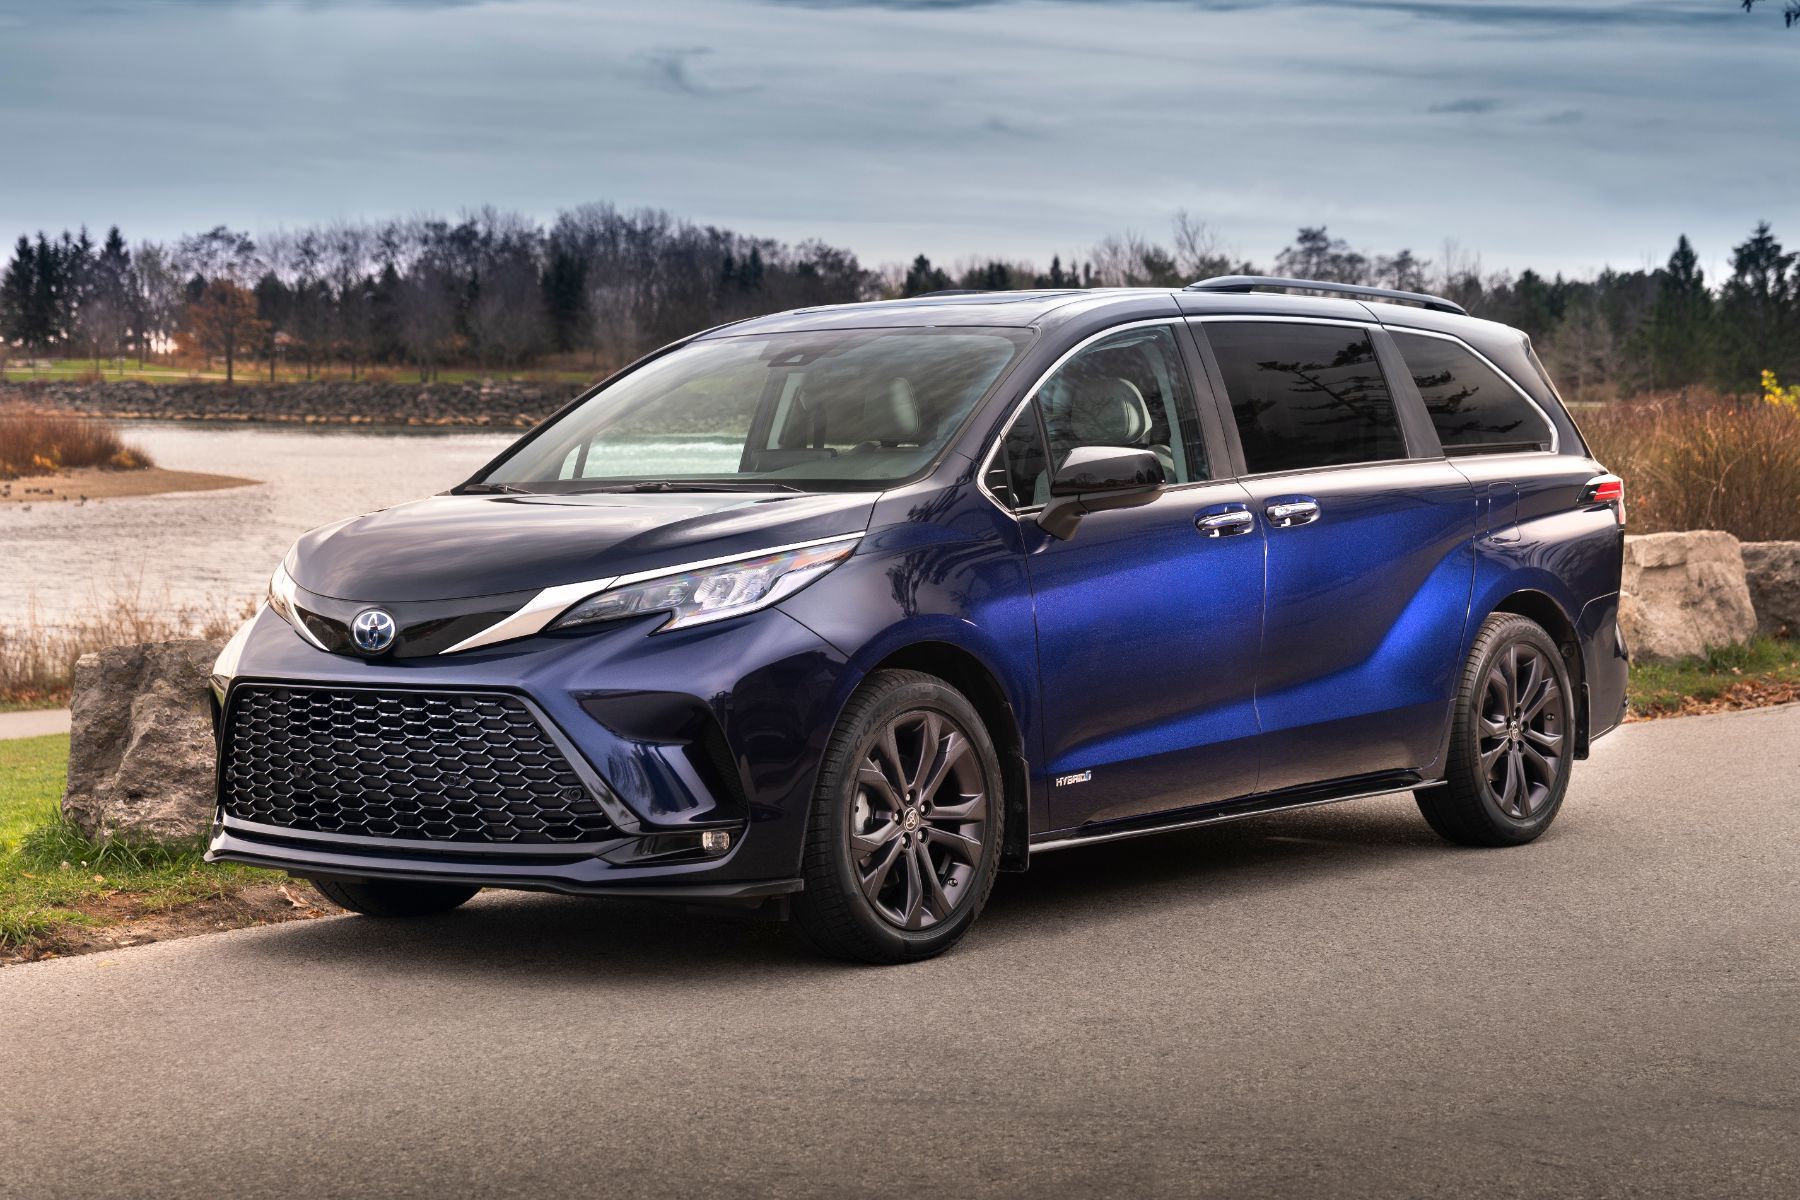 5 Things To Love About the 2021 Sienna